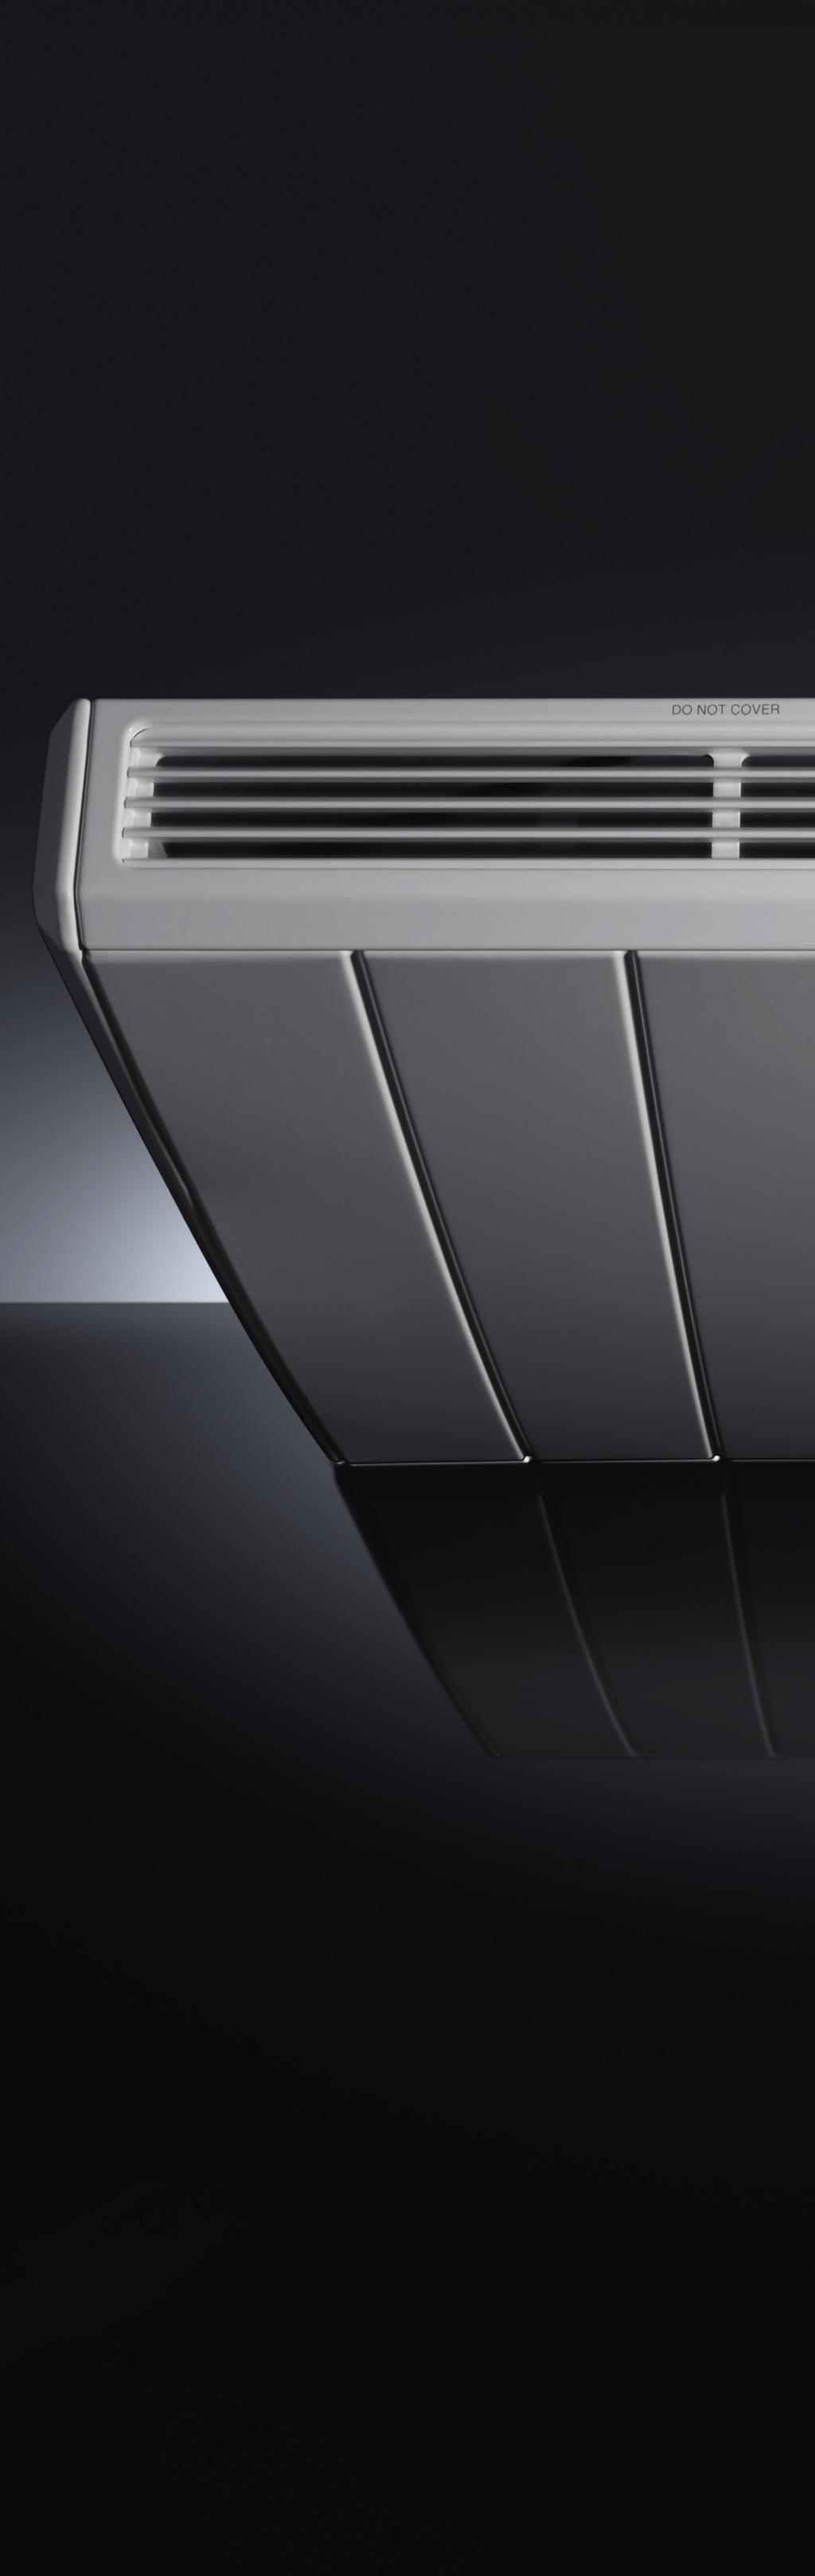 Introducing Q-Rad our most intelligent electric radiator to date.